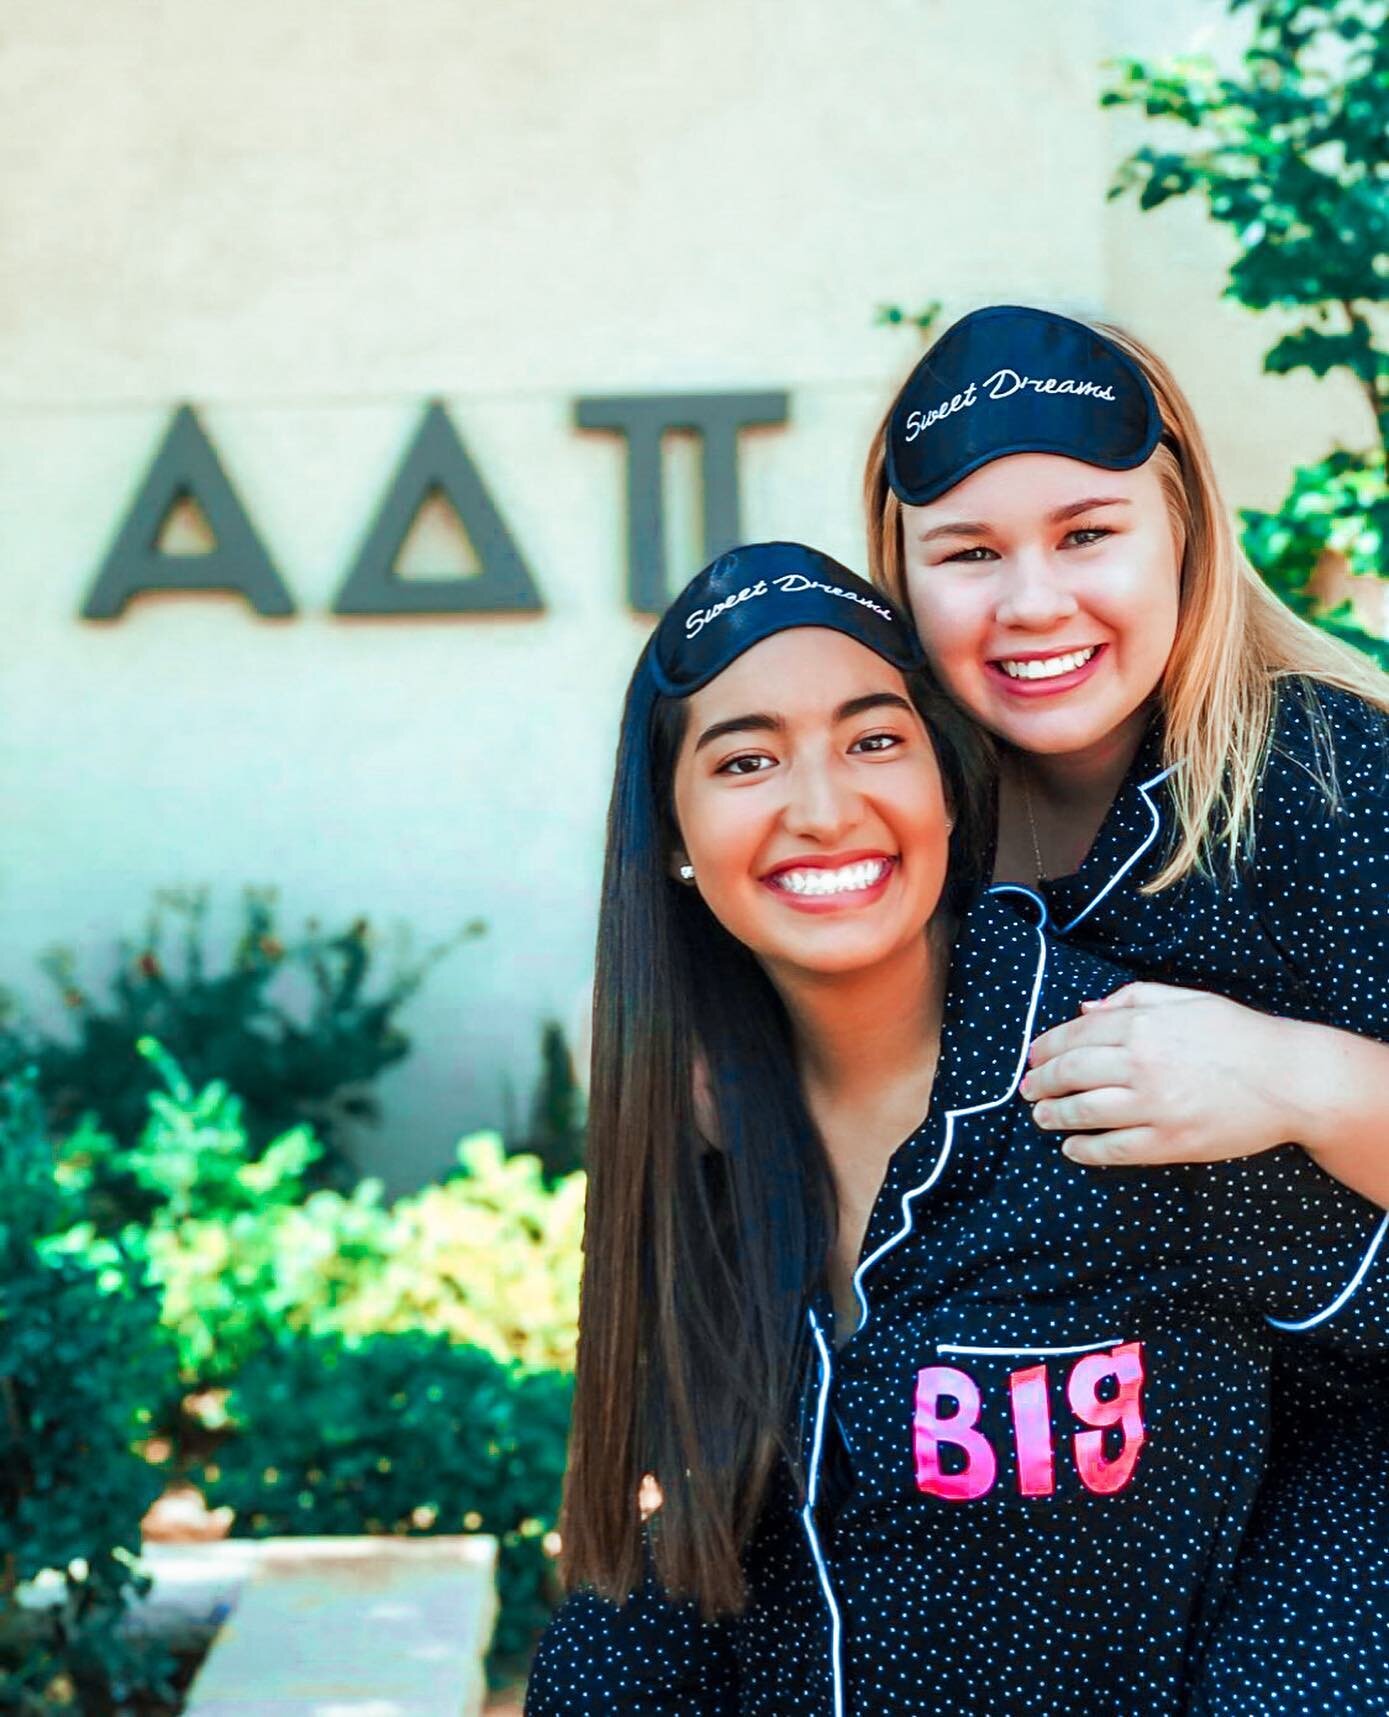 It&rsquo;s WLFEO Wednesday and we&rsquo;re dreaming of our future additions to our Diamond Families this weekend!💫Comment your favorite memory from Diamond Sister Reveal!💎💕

#adpiishome #bethefirst #techadpi #texasadpiproud #wlfeowednesday #throwb